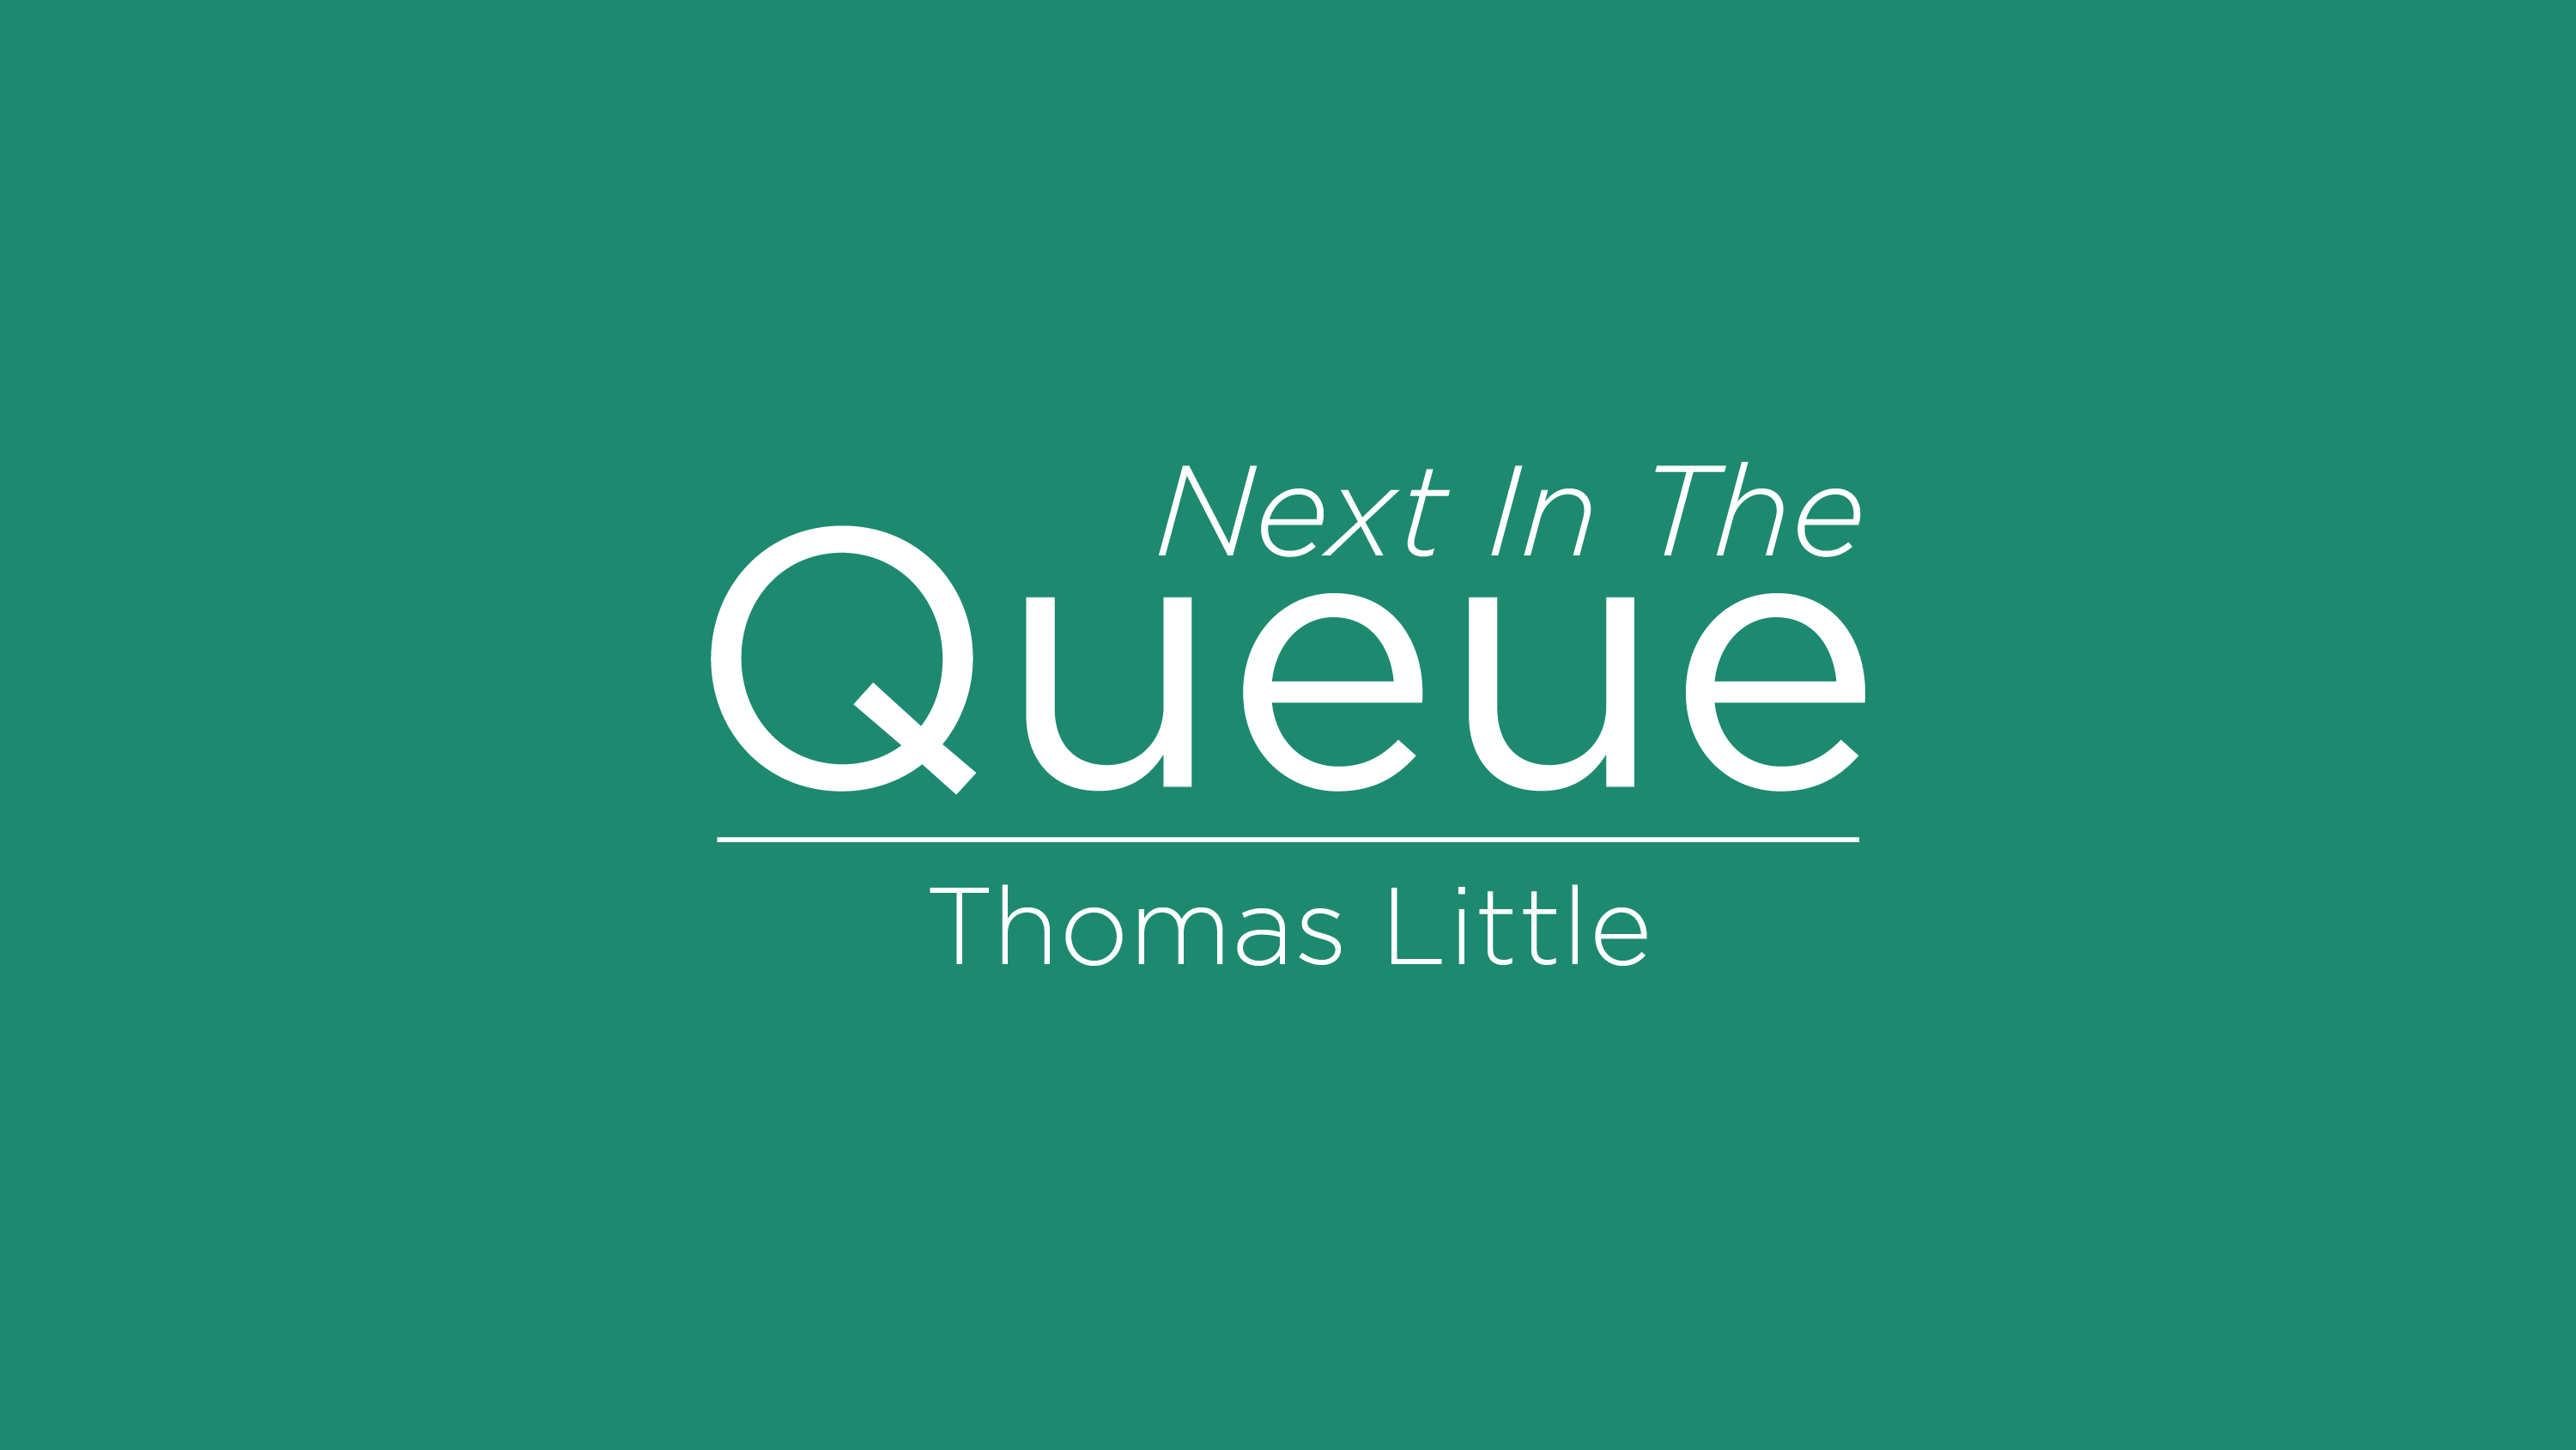 blog post cover graphic for The Queue featuring Thomas Little